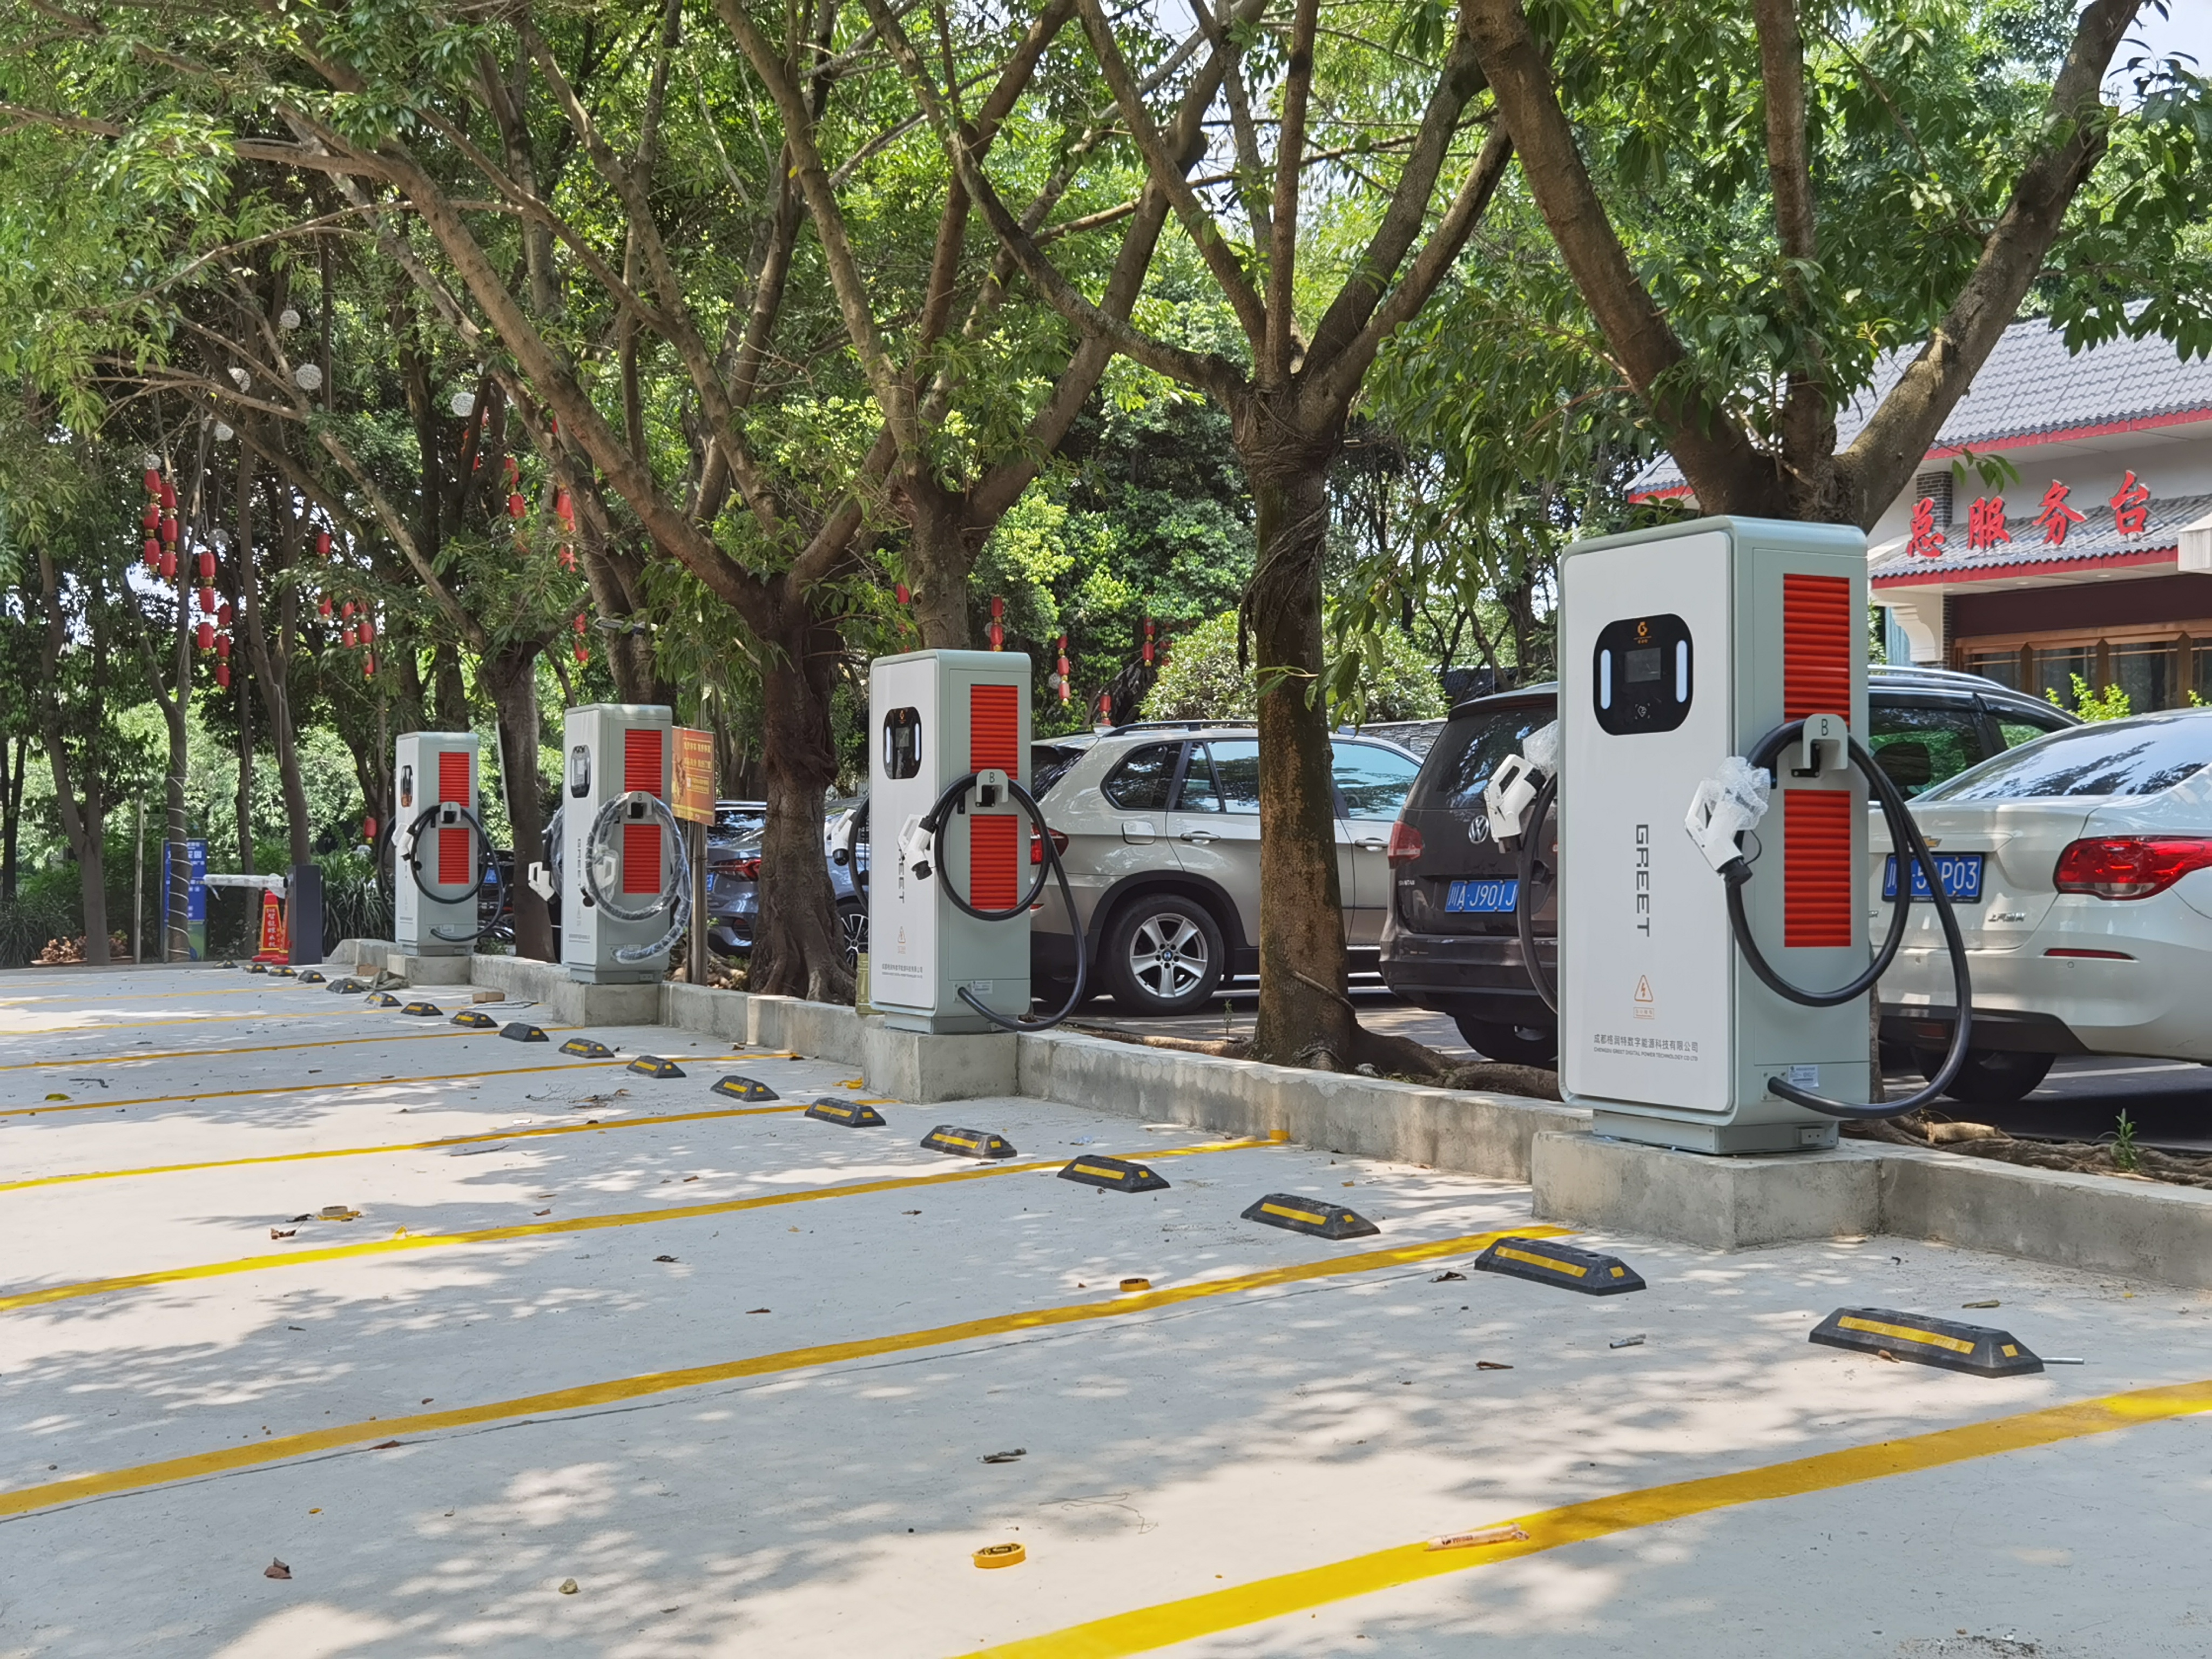 "2023 China Electric Vehicle User Charging Behaviour Study Report: Key Insights and Trends"